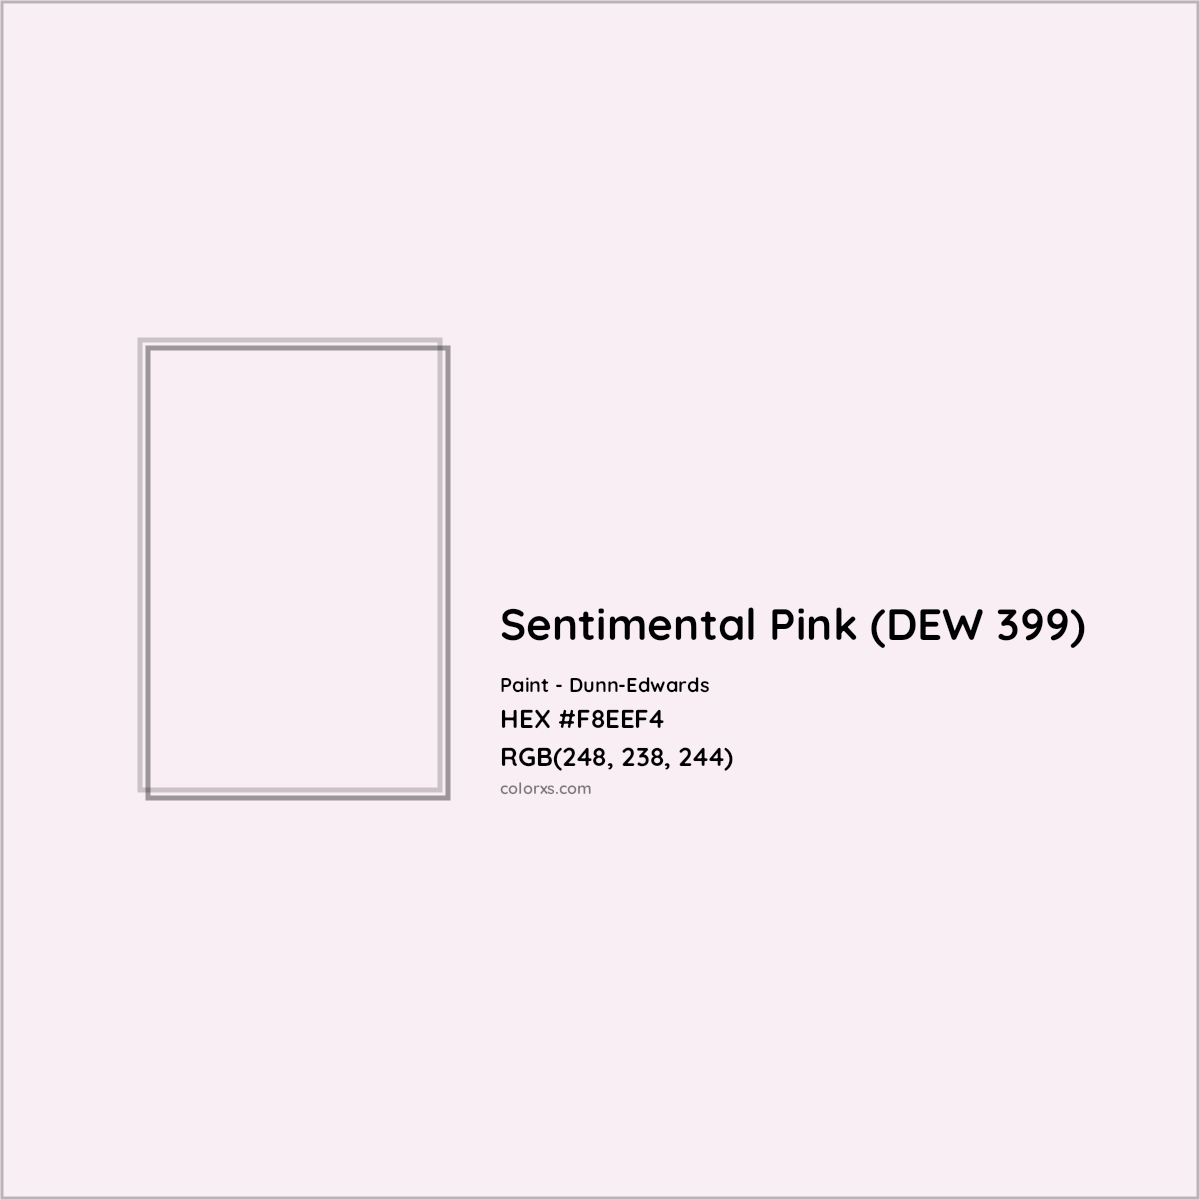 HEX #F8EEF4 Sentimental Pink (DEW 399) Paint Dunn-Edwards - Color Code